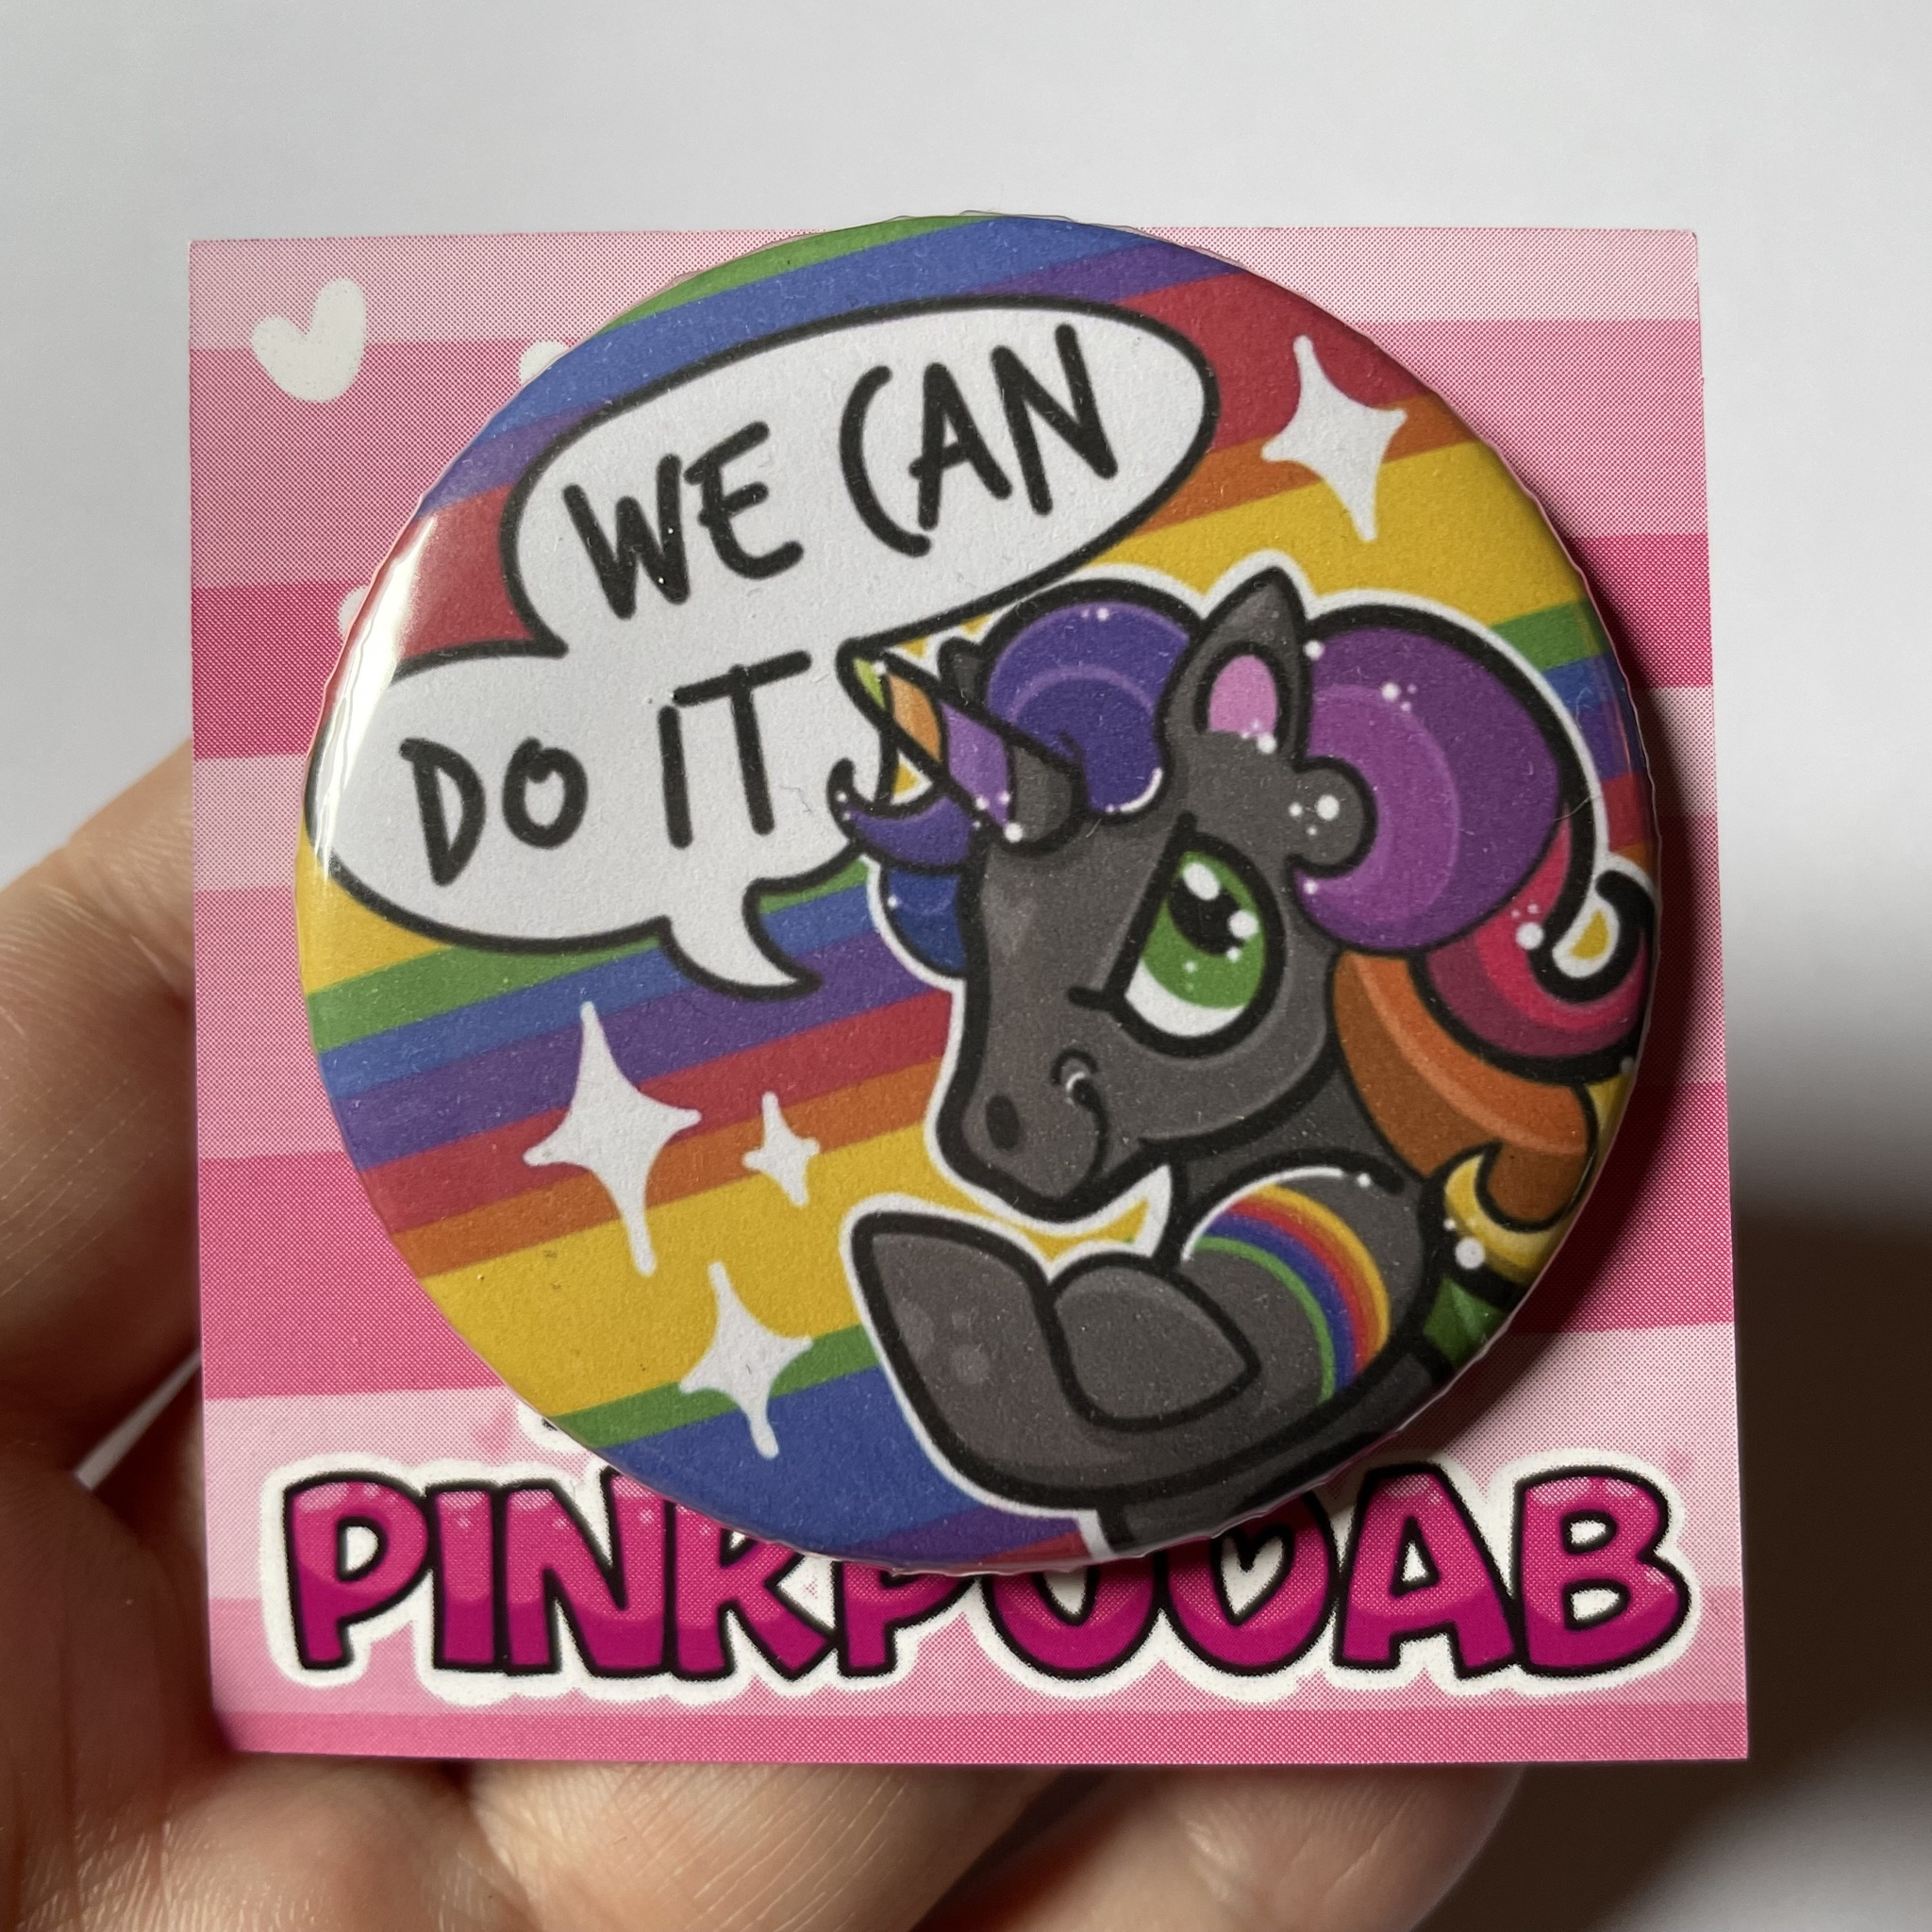 BUTTON - We Can Do It